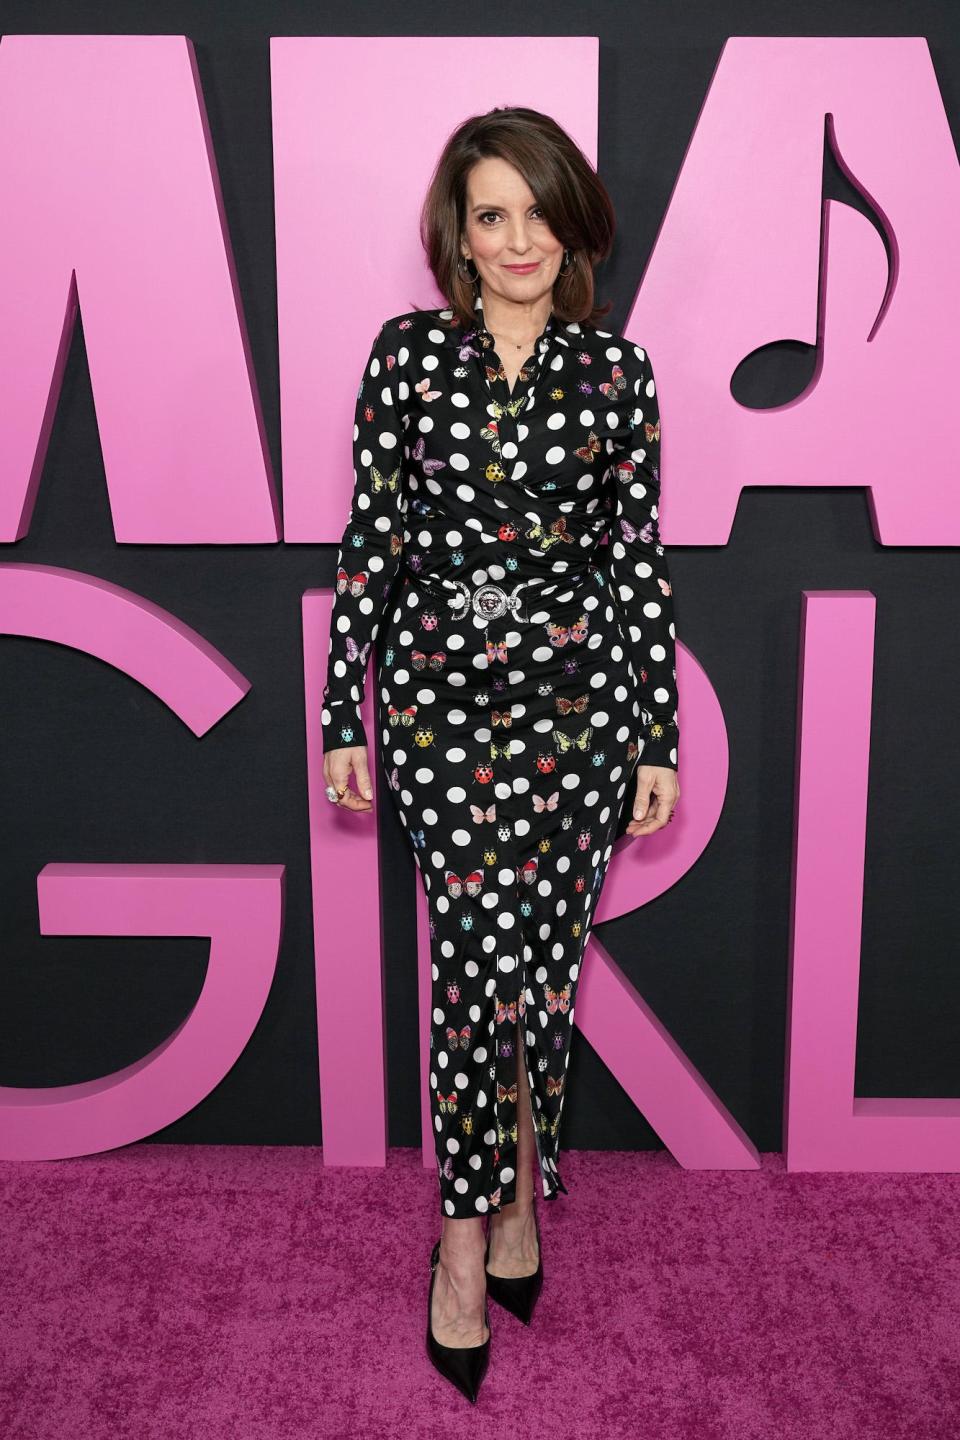 Tina Fey attends the "Mean Girls" premiere.